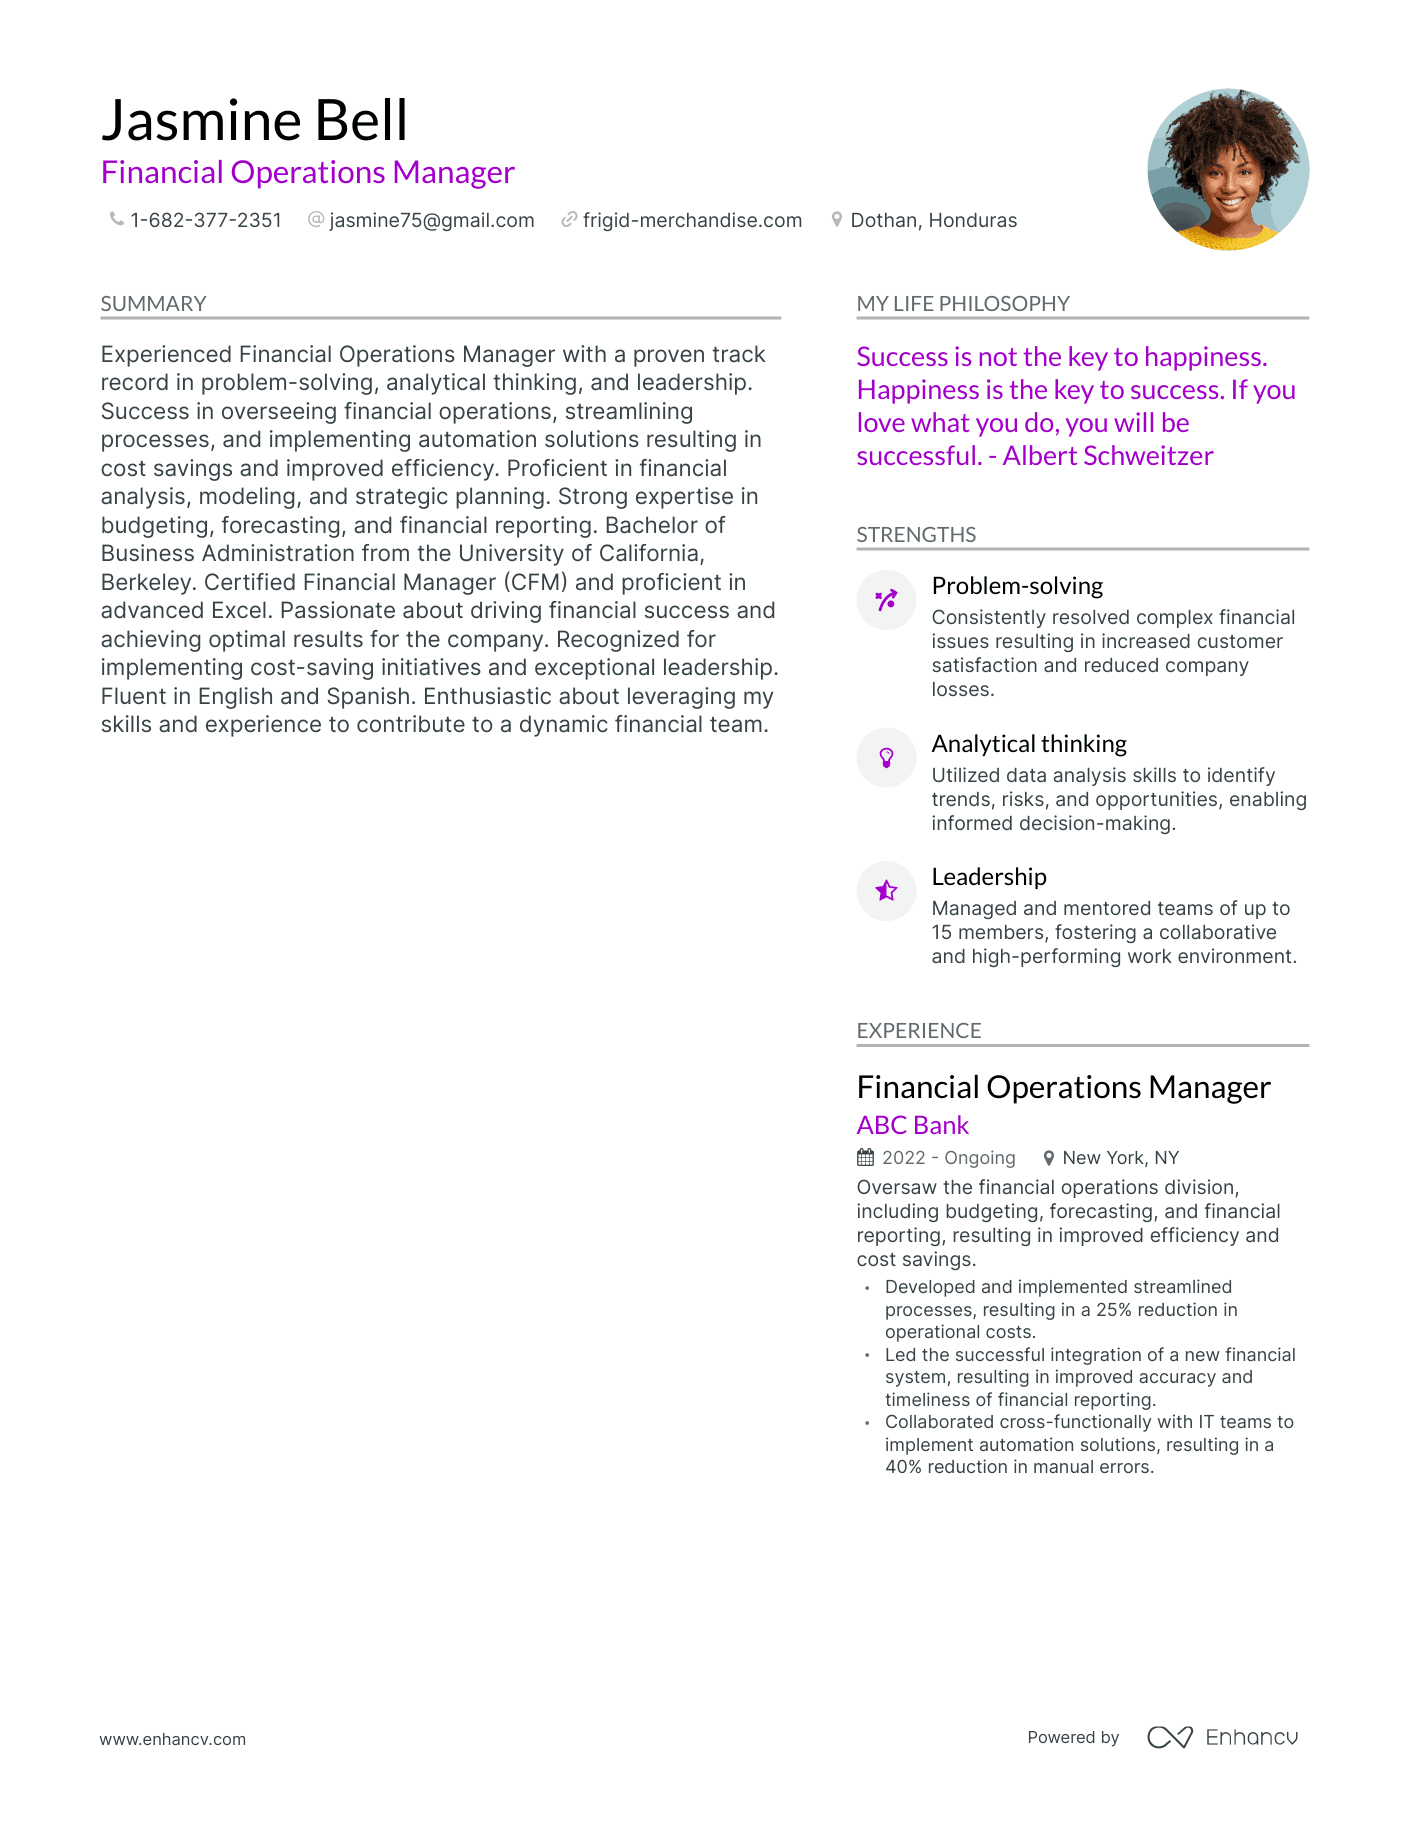 Financial Operations Manager resume example